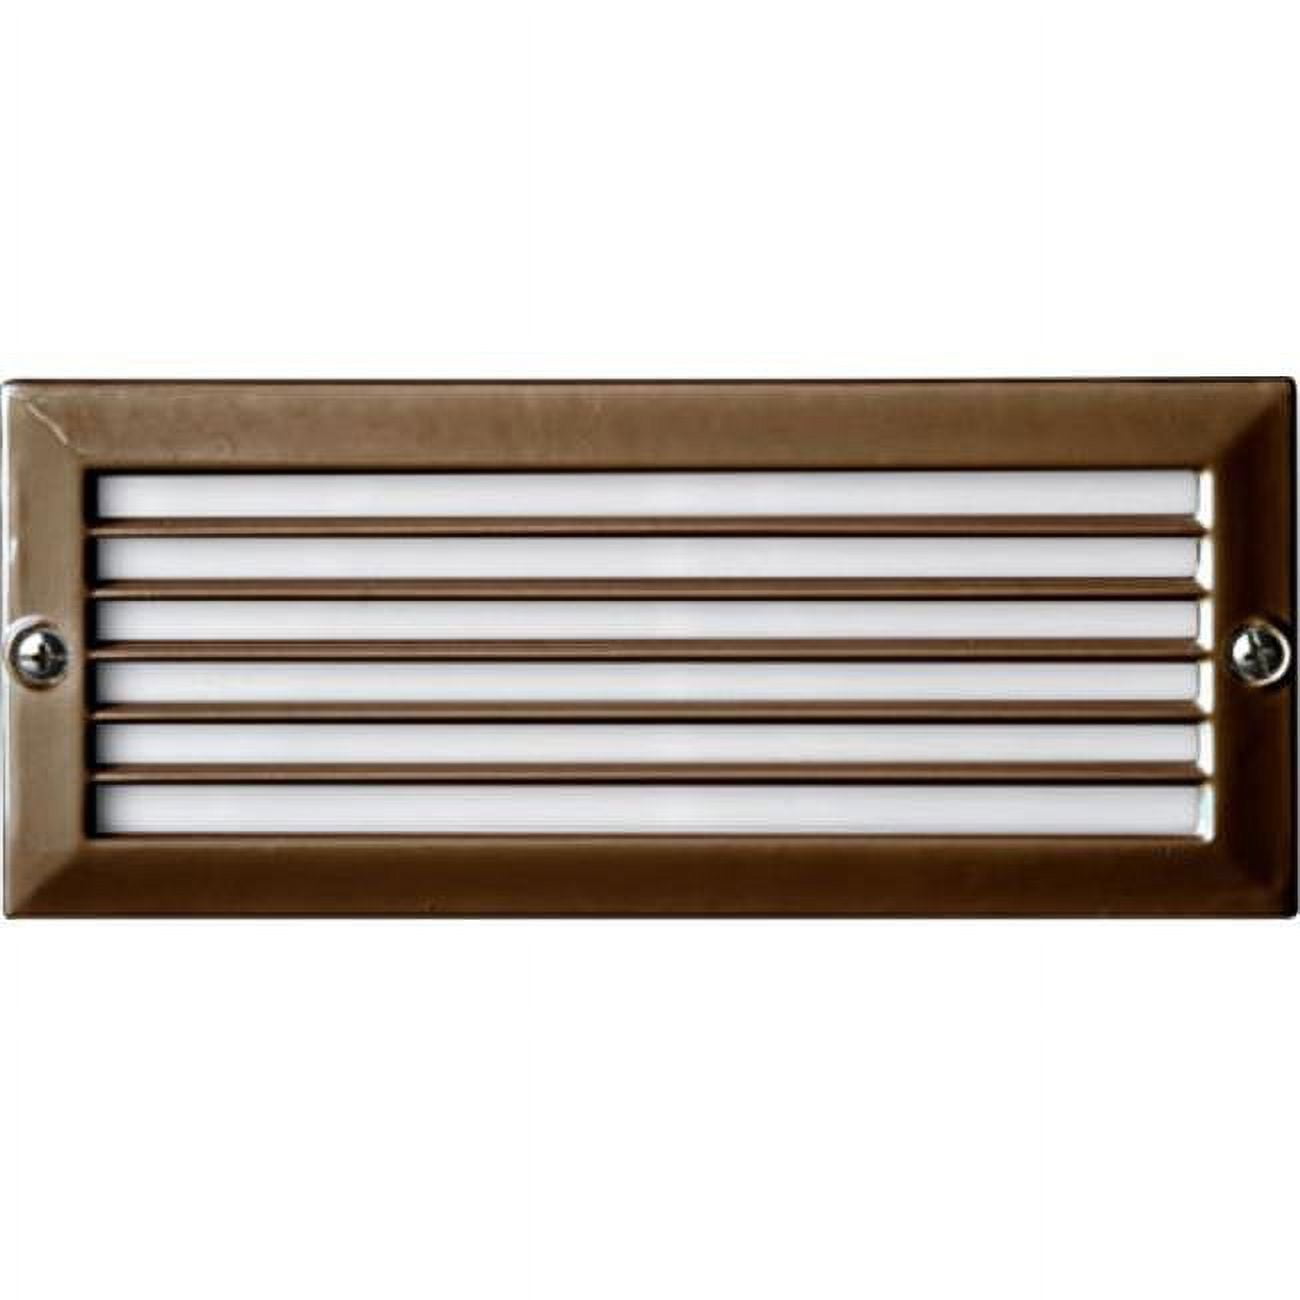 Picture of Dabmar Lighting LV601-BZ Cast Aluminum Recessed Louvered Brick, Step & Wall Light, Bronze - 4 x 9.13 x 3.25 in.